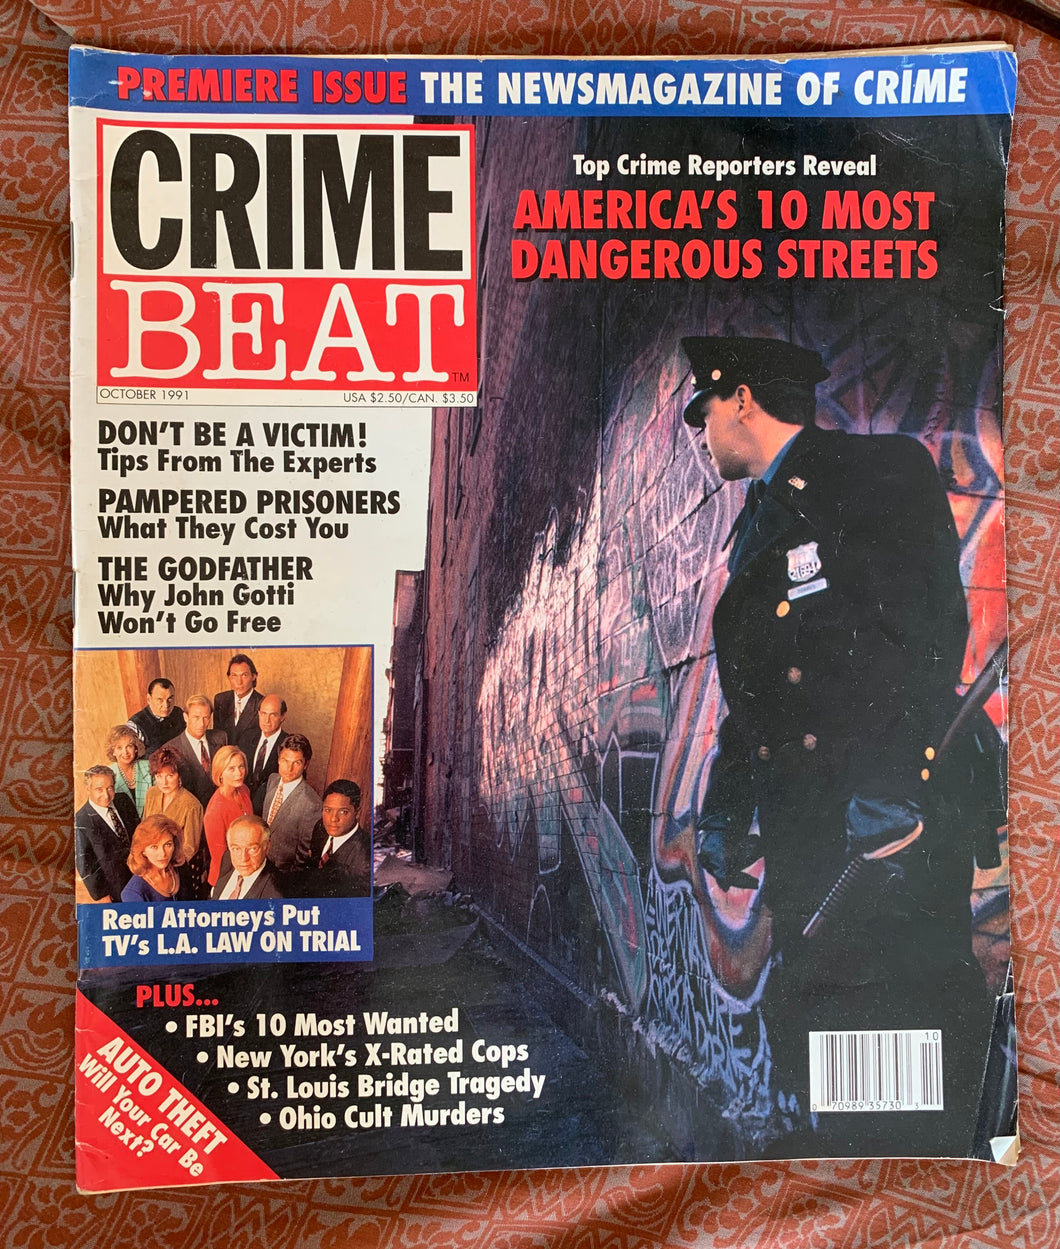 Crime Beat October 1991 (Premiere Issue)